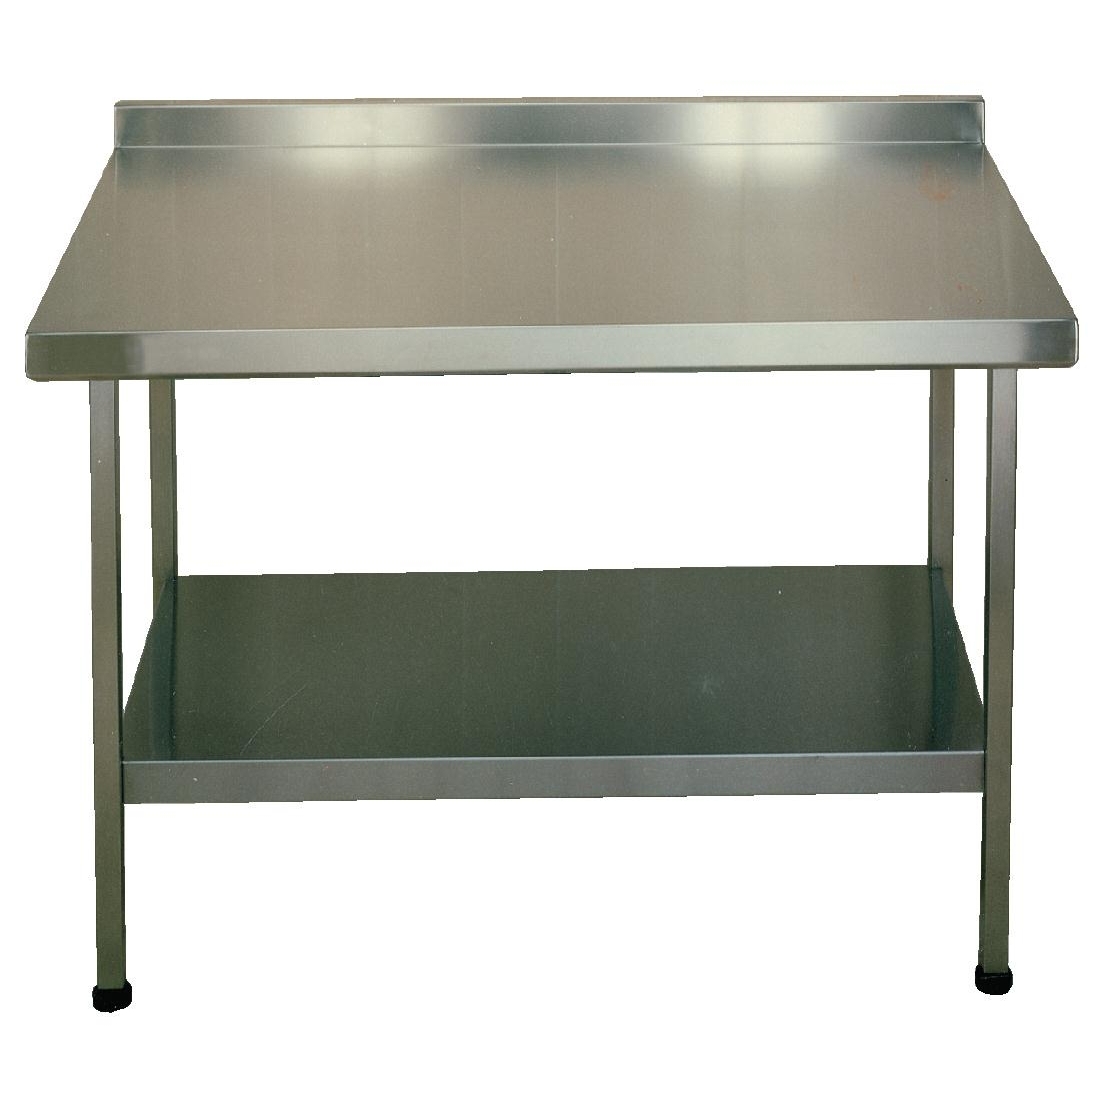 Franke Sissons Stainless Steel Wall Table with Upstand 600x600mm